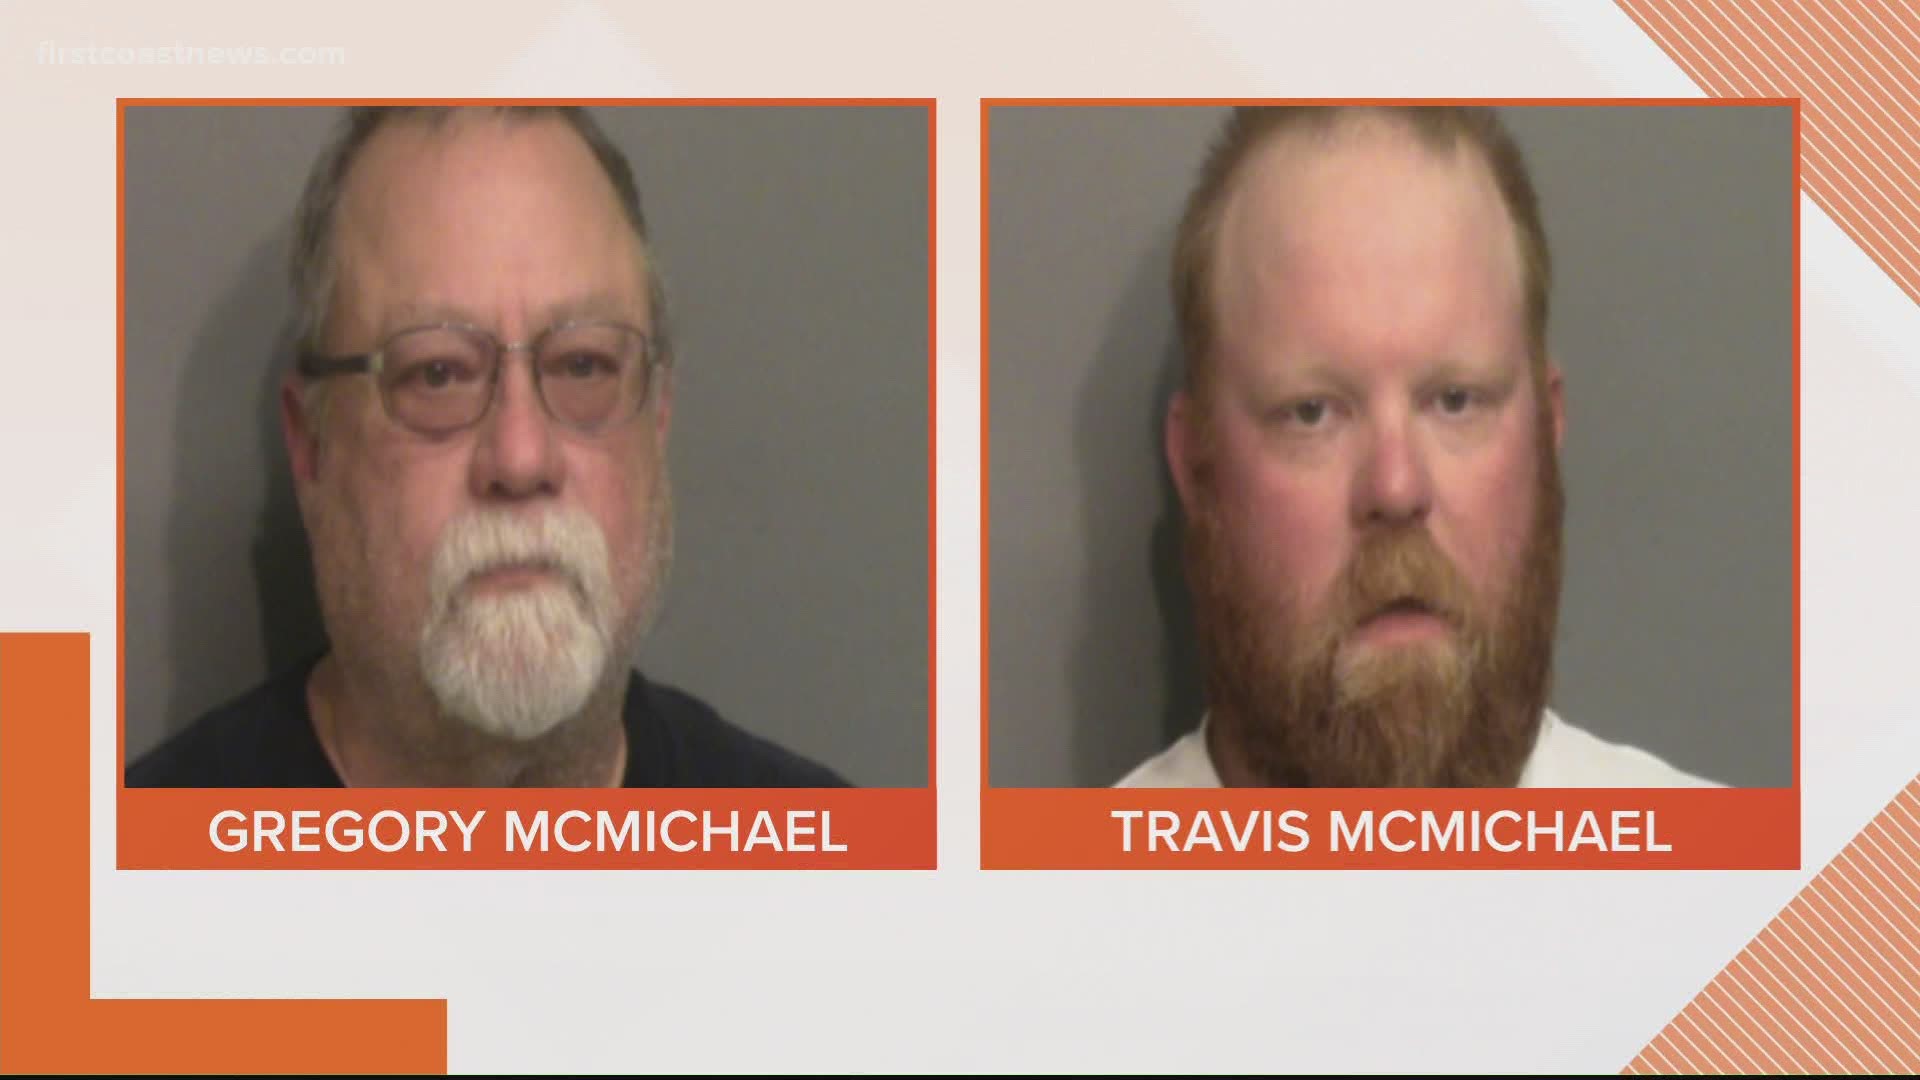 Both Gregory and Travis McMichael have been charged with murder and aggravated assault in the Ahmaud Arbery murder investigation.